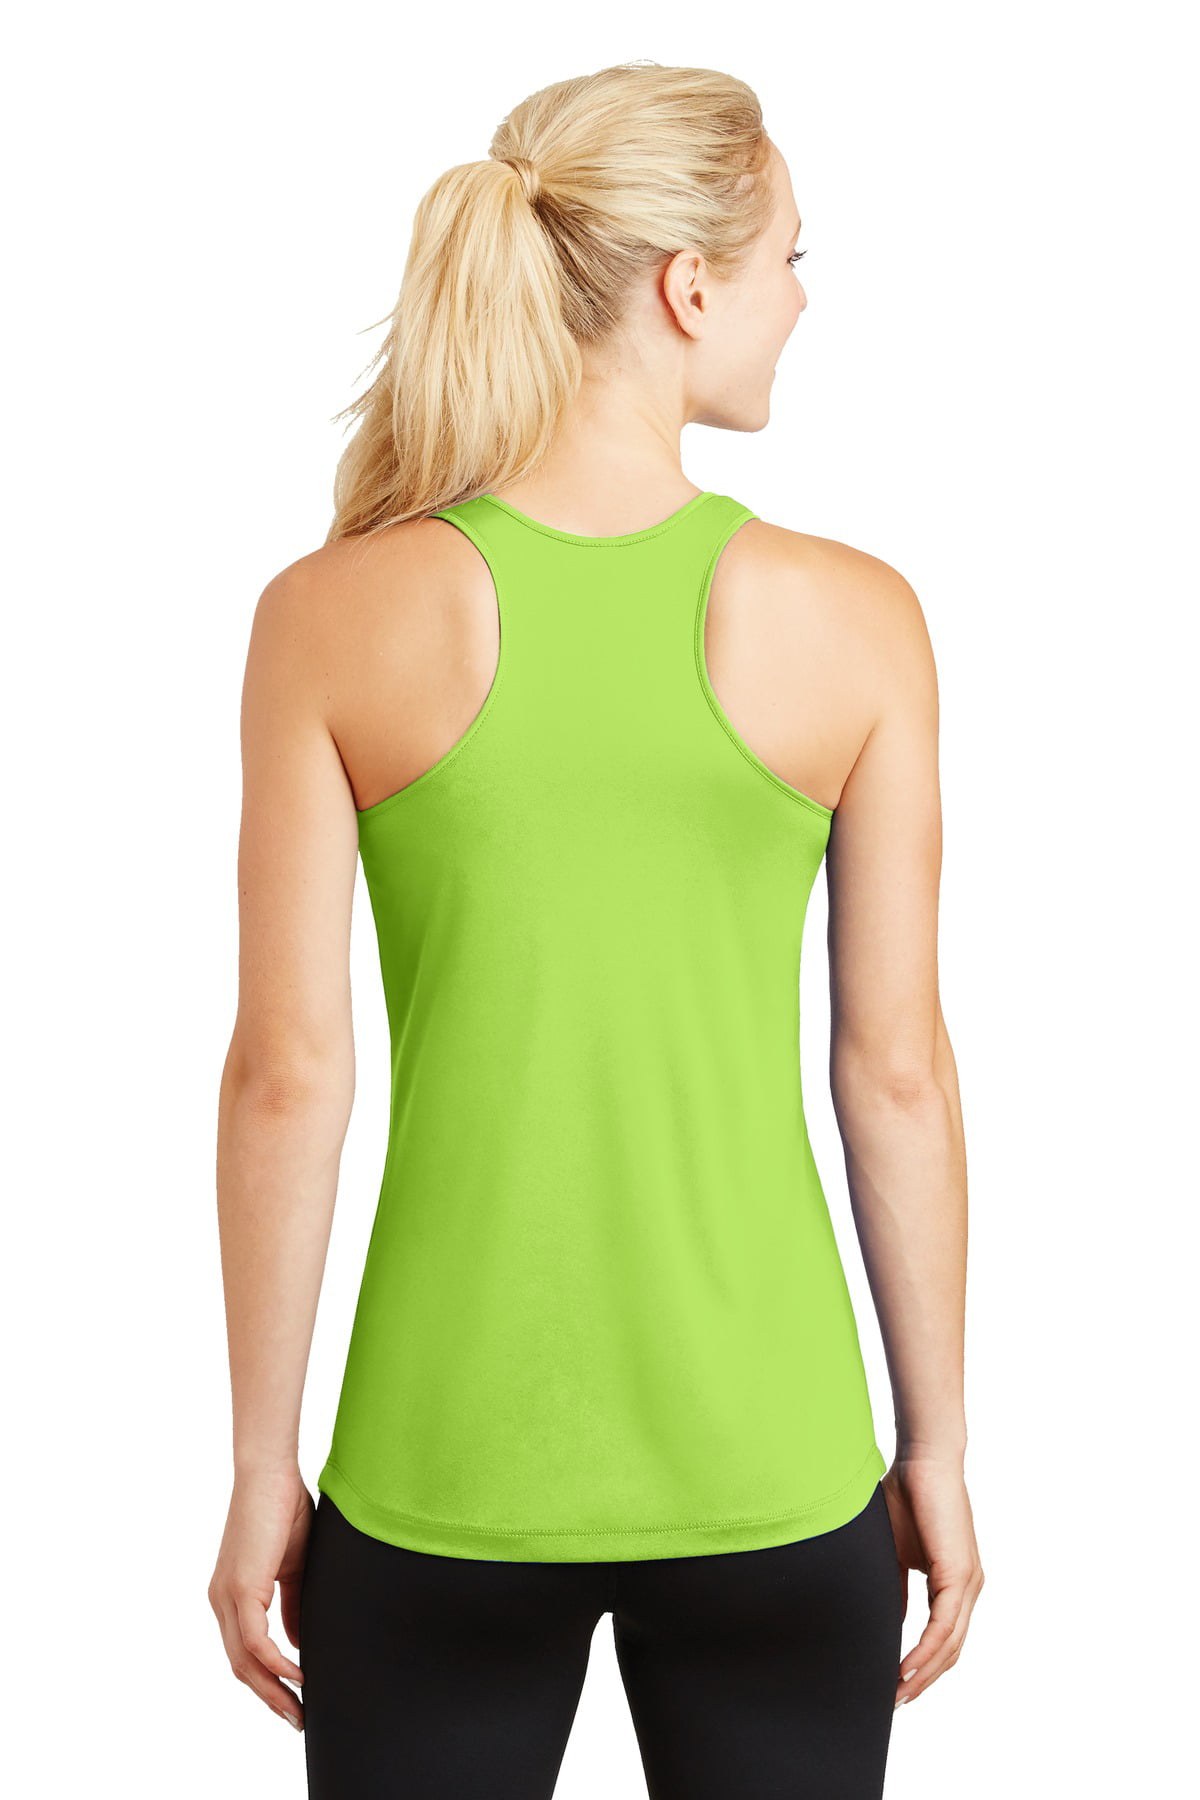 High Visibility Neon Yellow Wicking Tank for Texas Pride the Strong Athletic  Texan Performance Racerback Wicking Tank